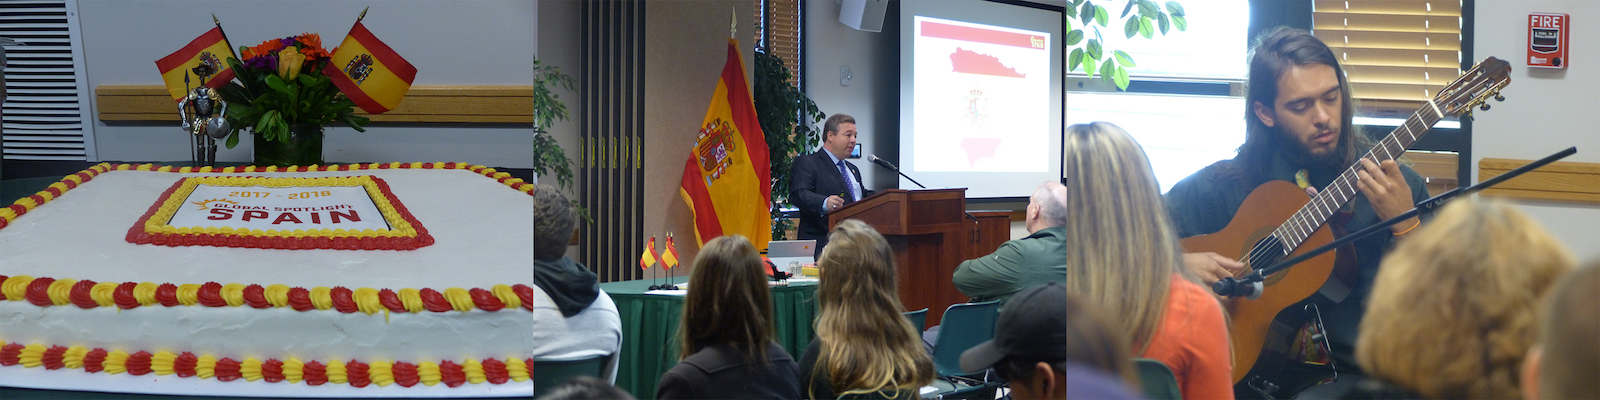 From left to right, a photo of a cake that says Spain, a photo with a man speaking at a lectern, a man playing an acoustical guitar to a crowd.